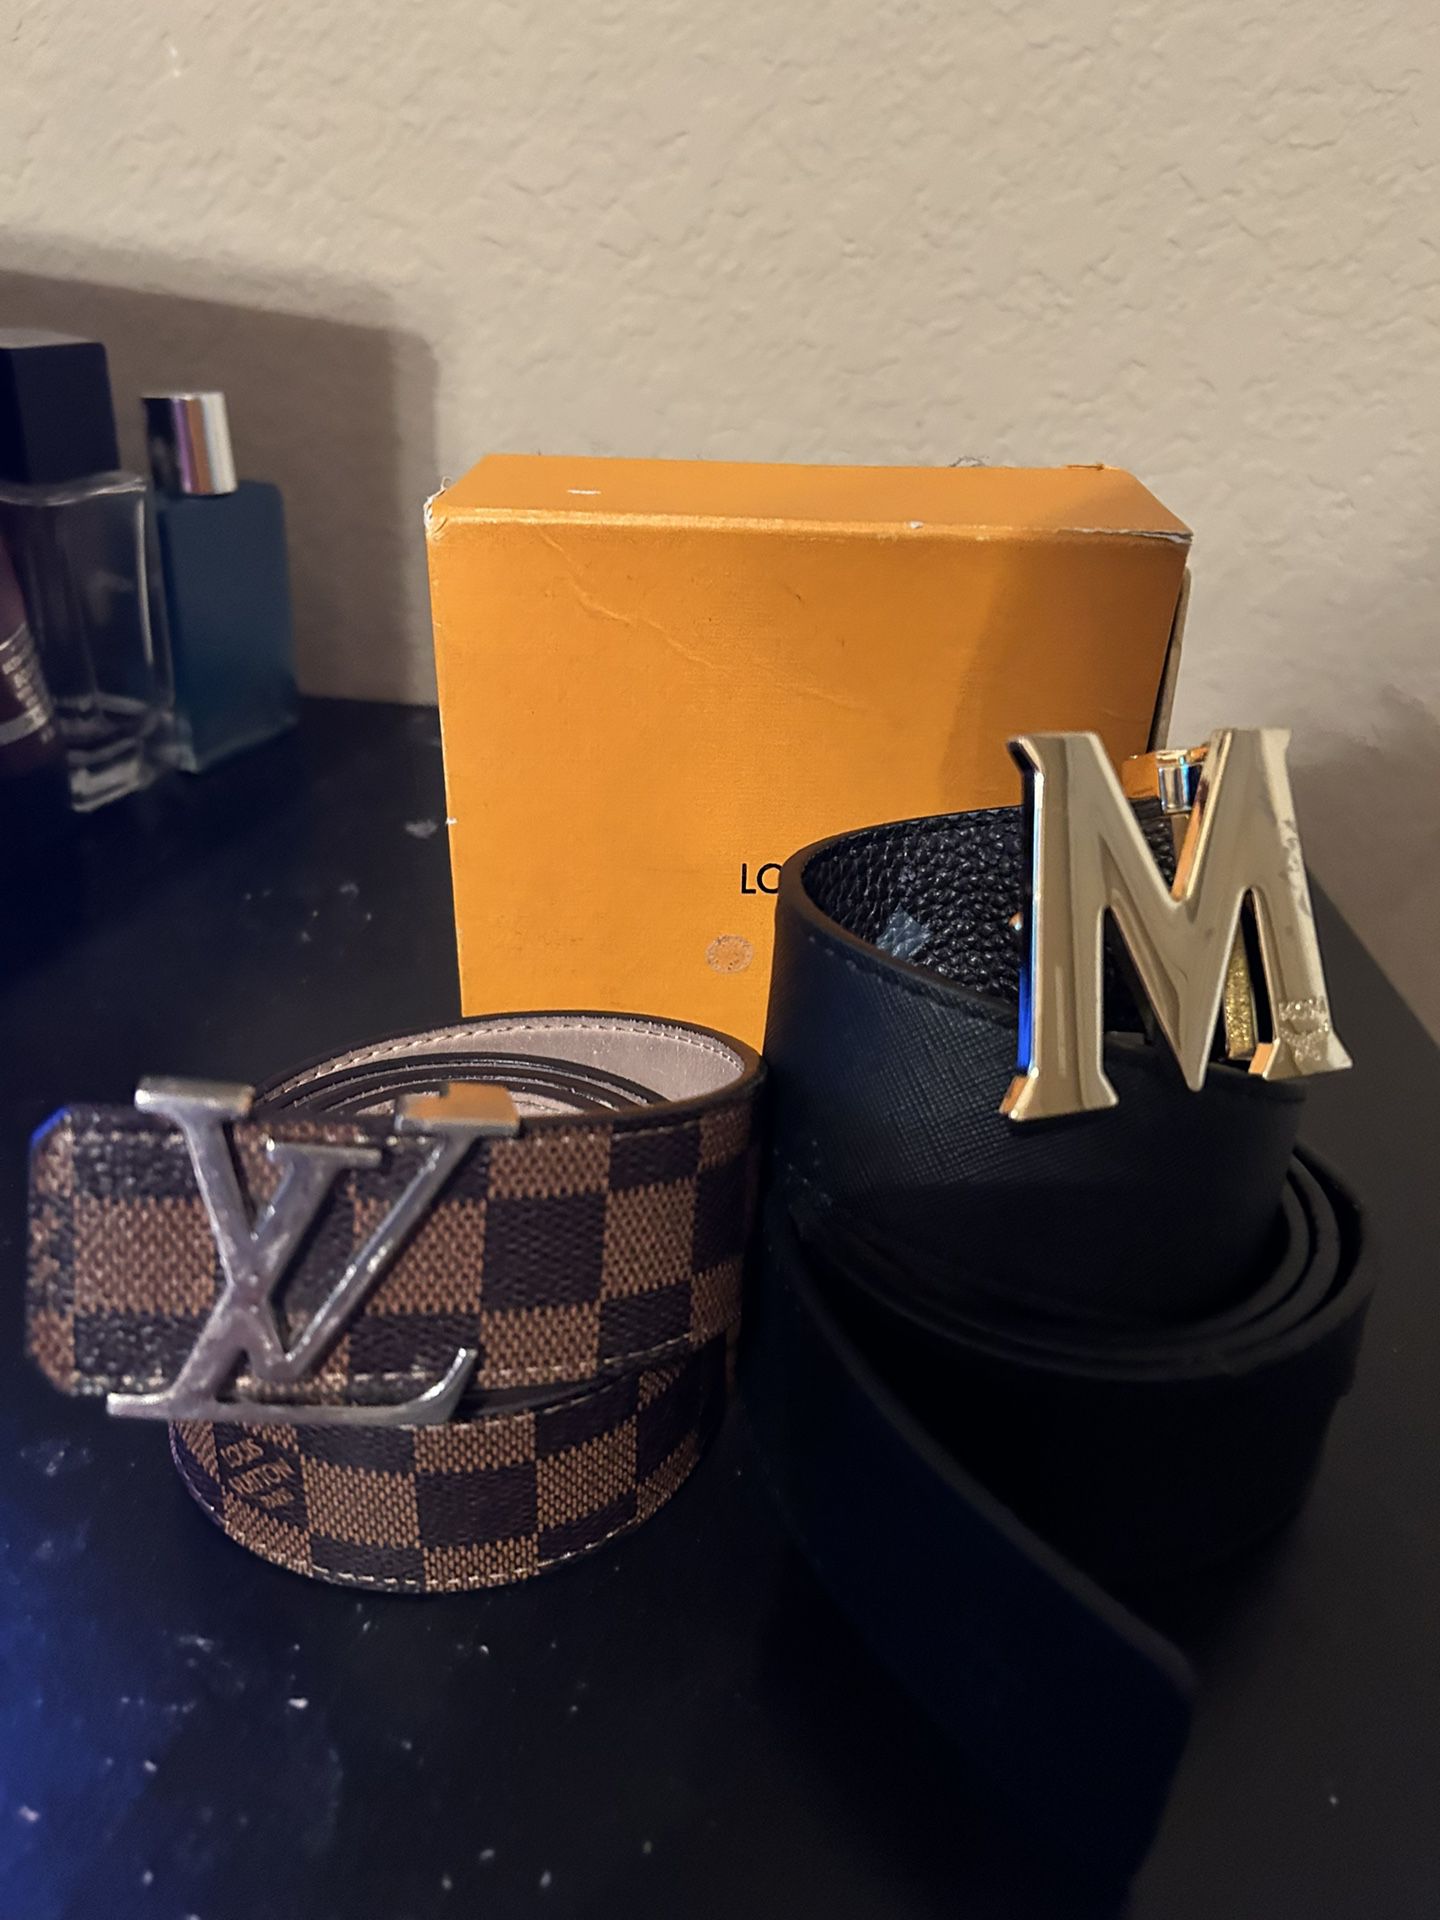 Lv Belt And Mcm Belt. for Sale in Castroville, TX - OfferUp